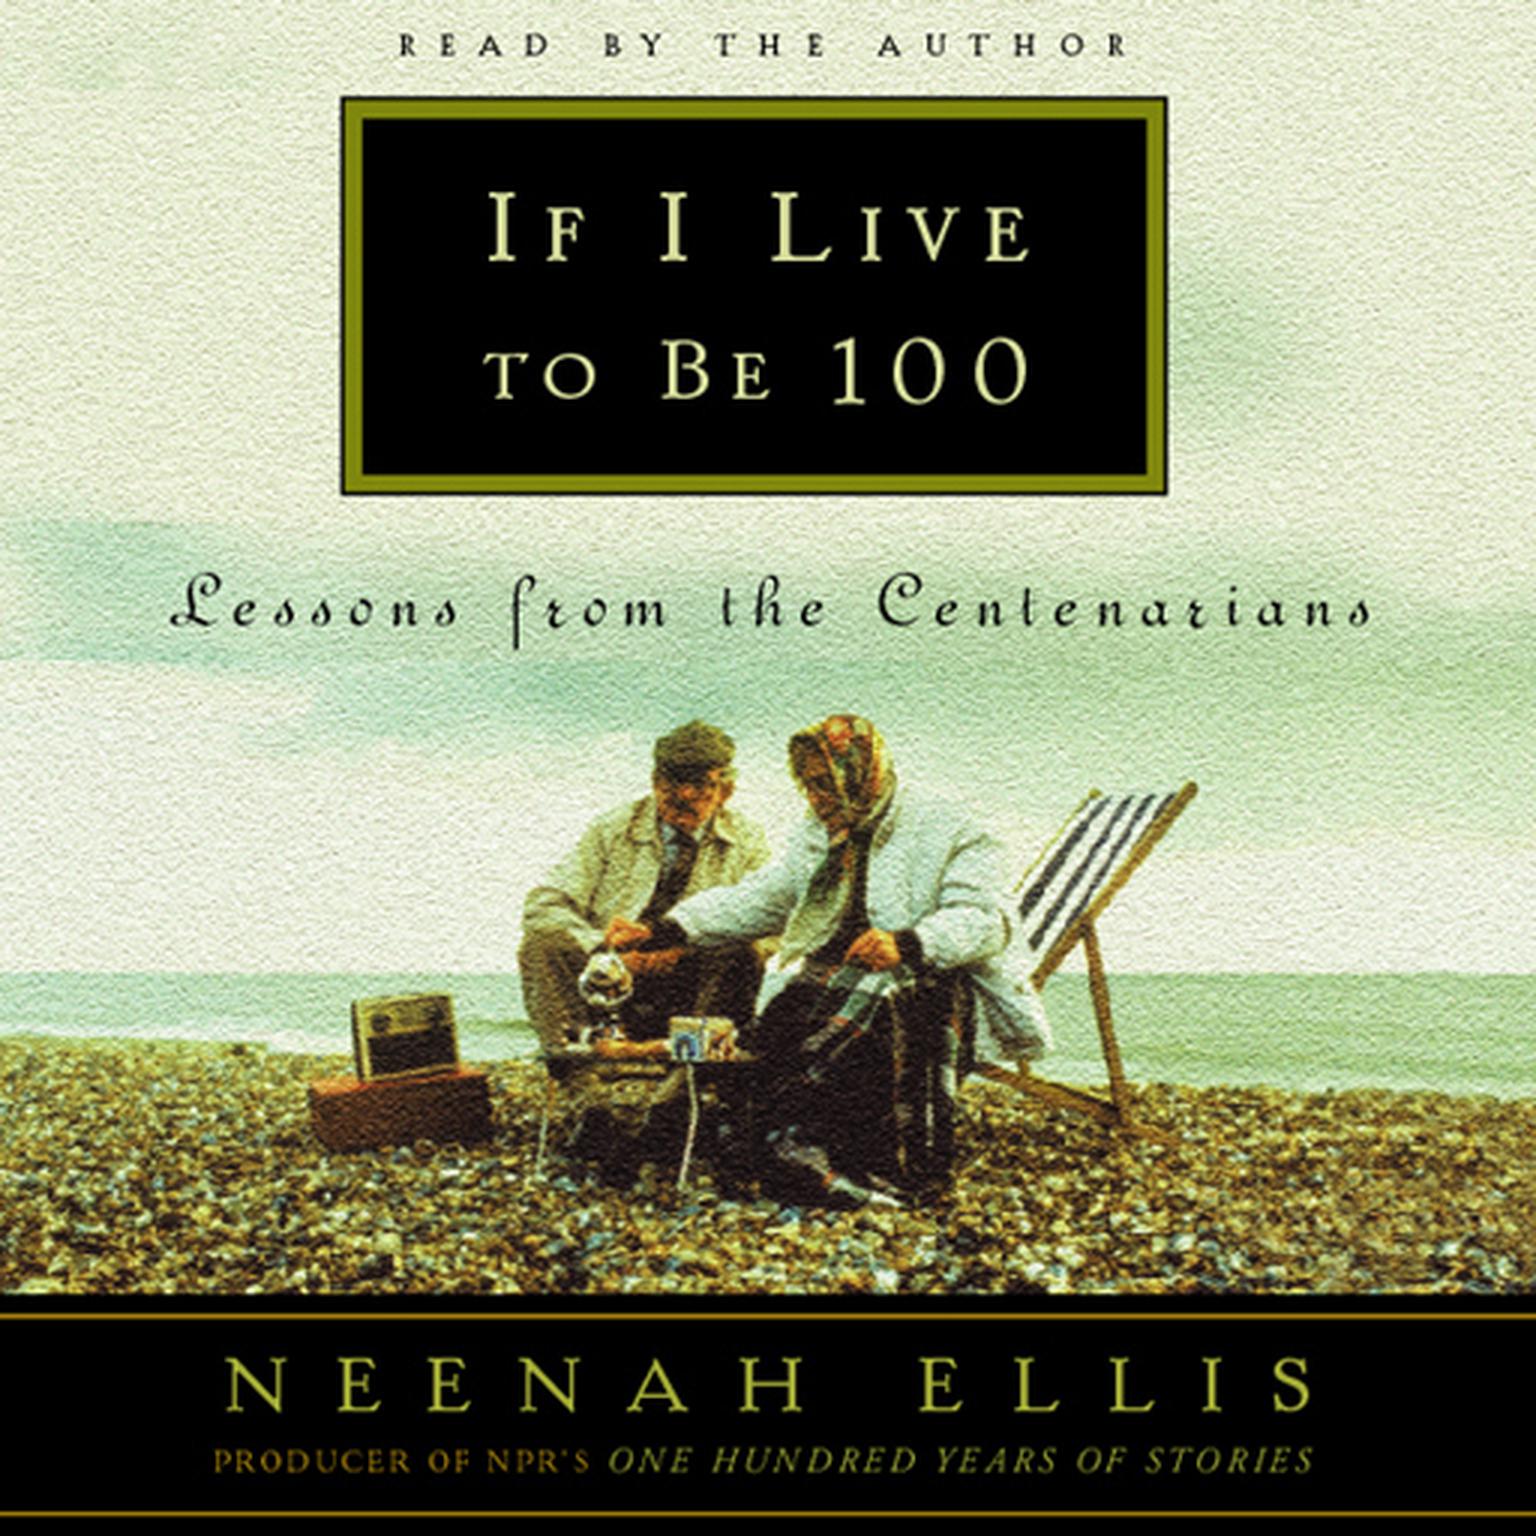 If I Live to Be 100 (Abridged): Lessons from the Centenarians Audiobook, by Neenah Ellis